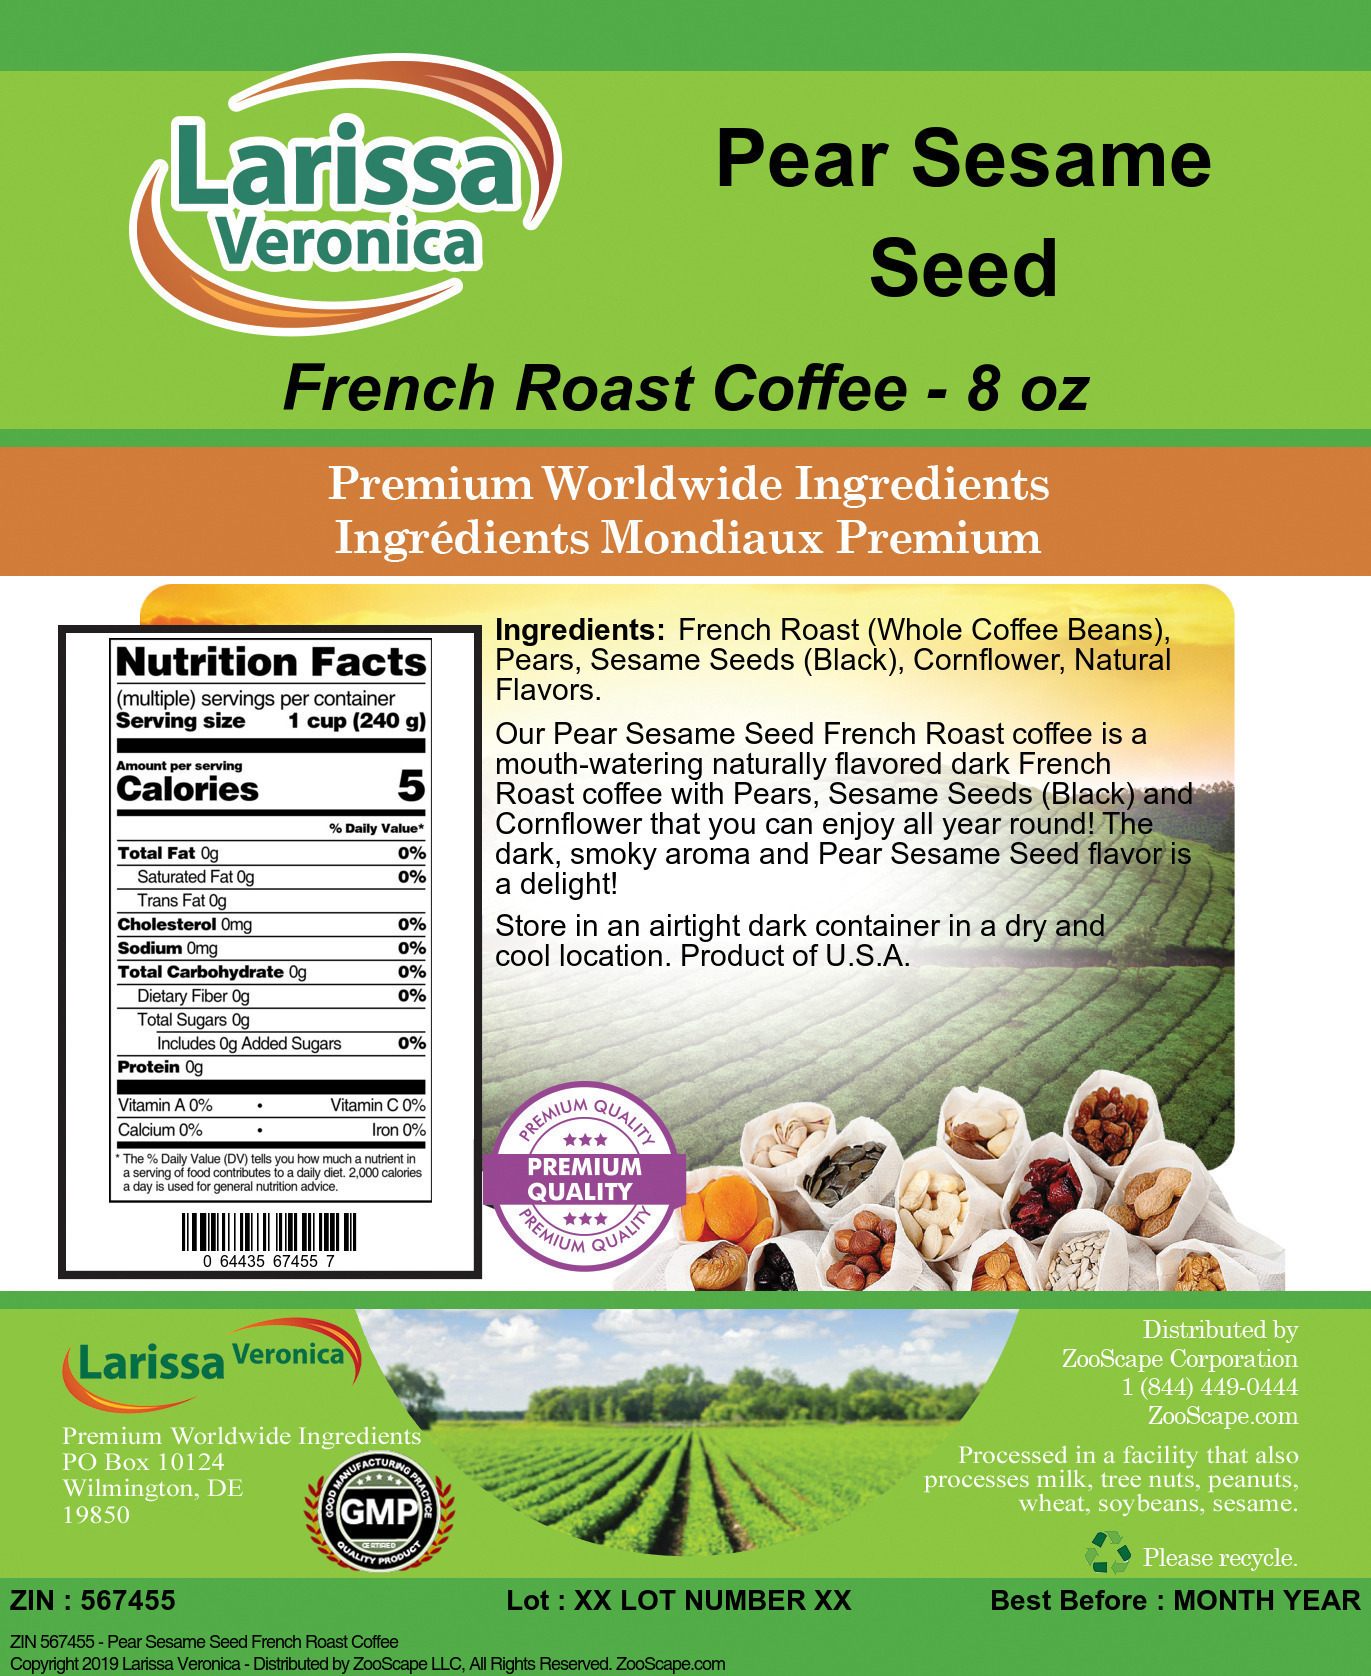 Pear Sesame Seed French Roast Coffee - Label